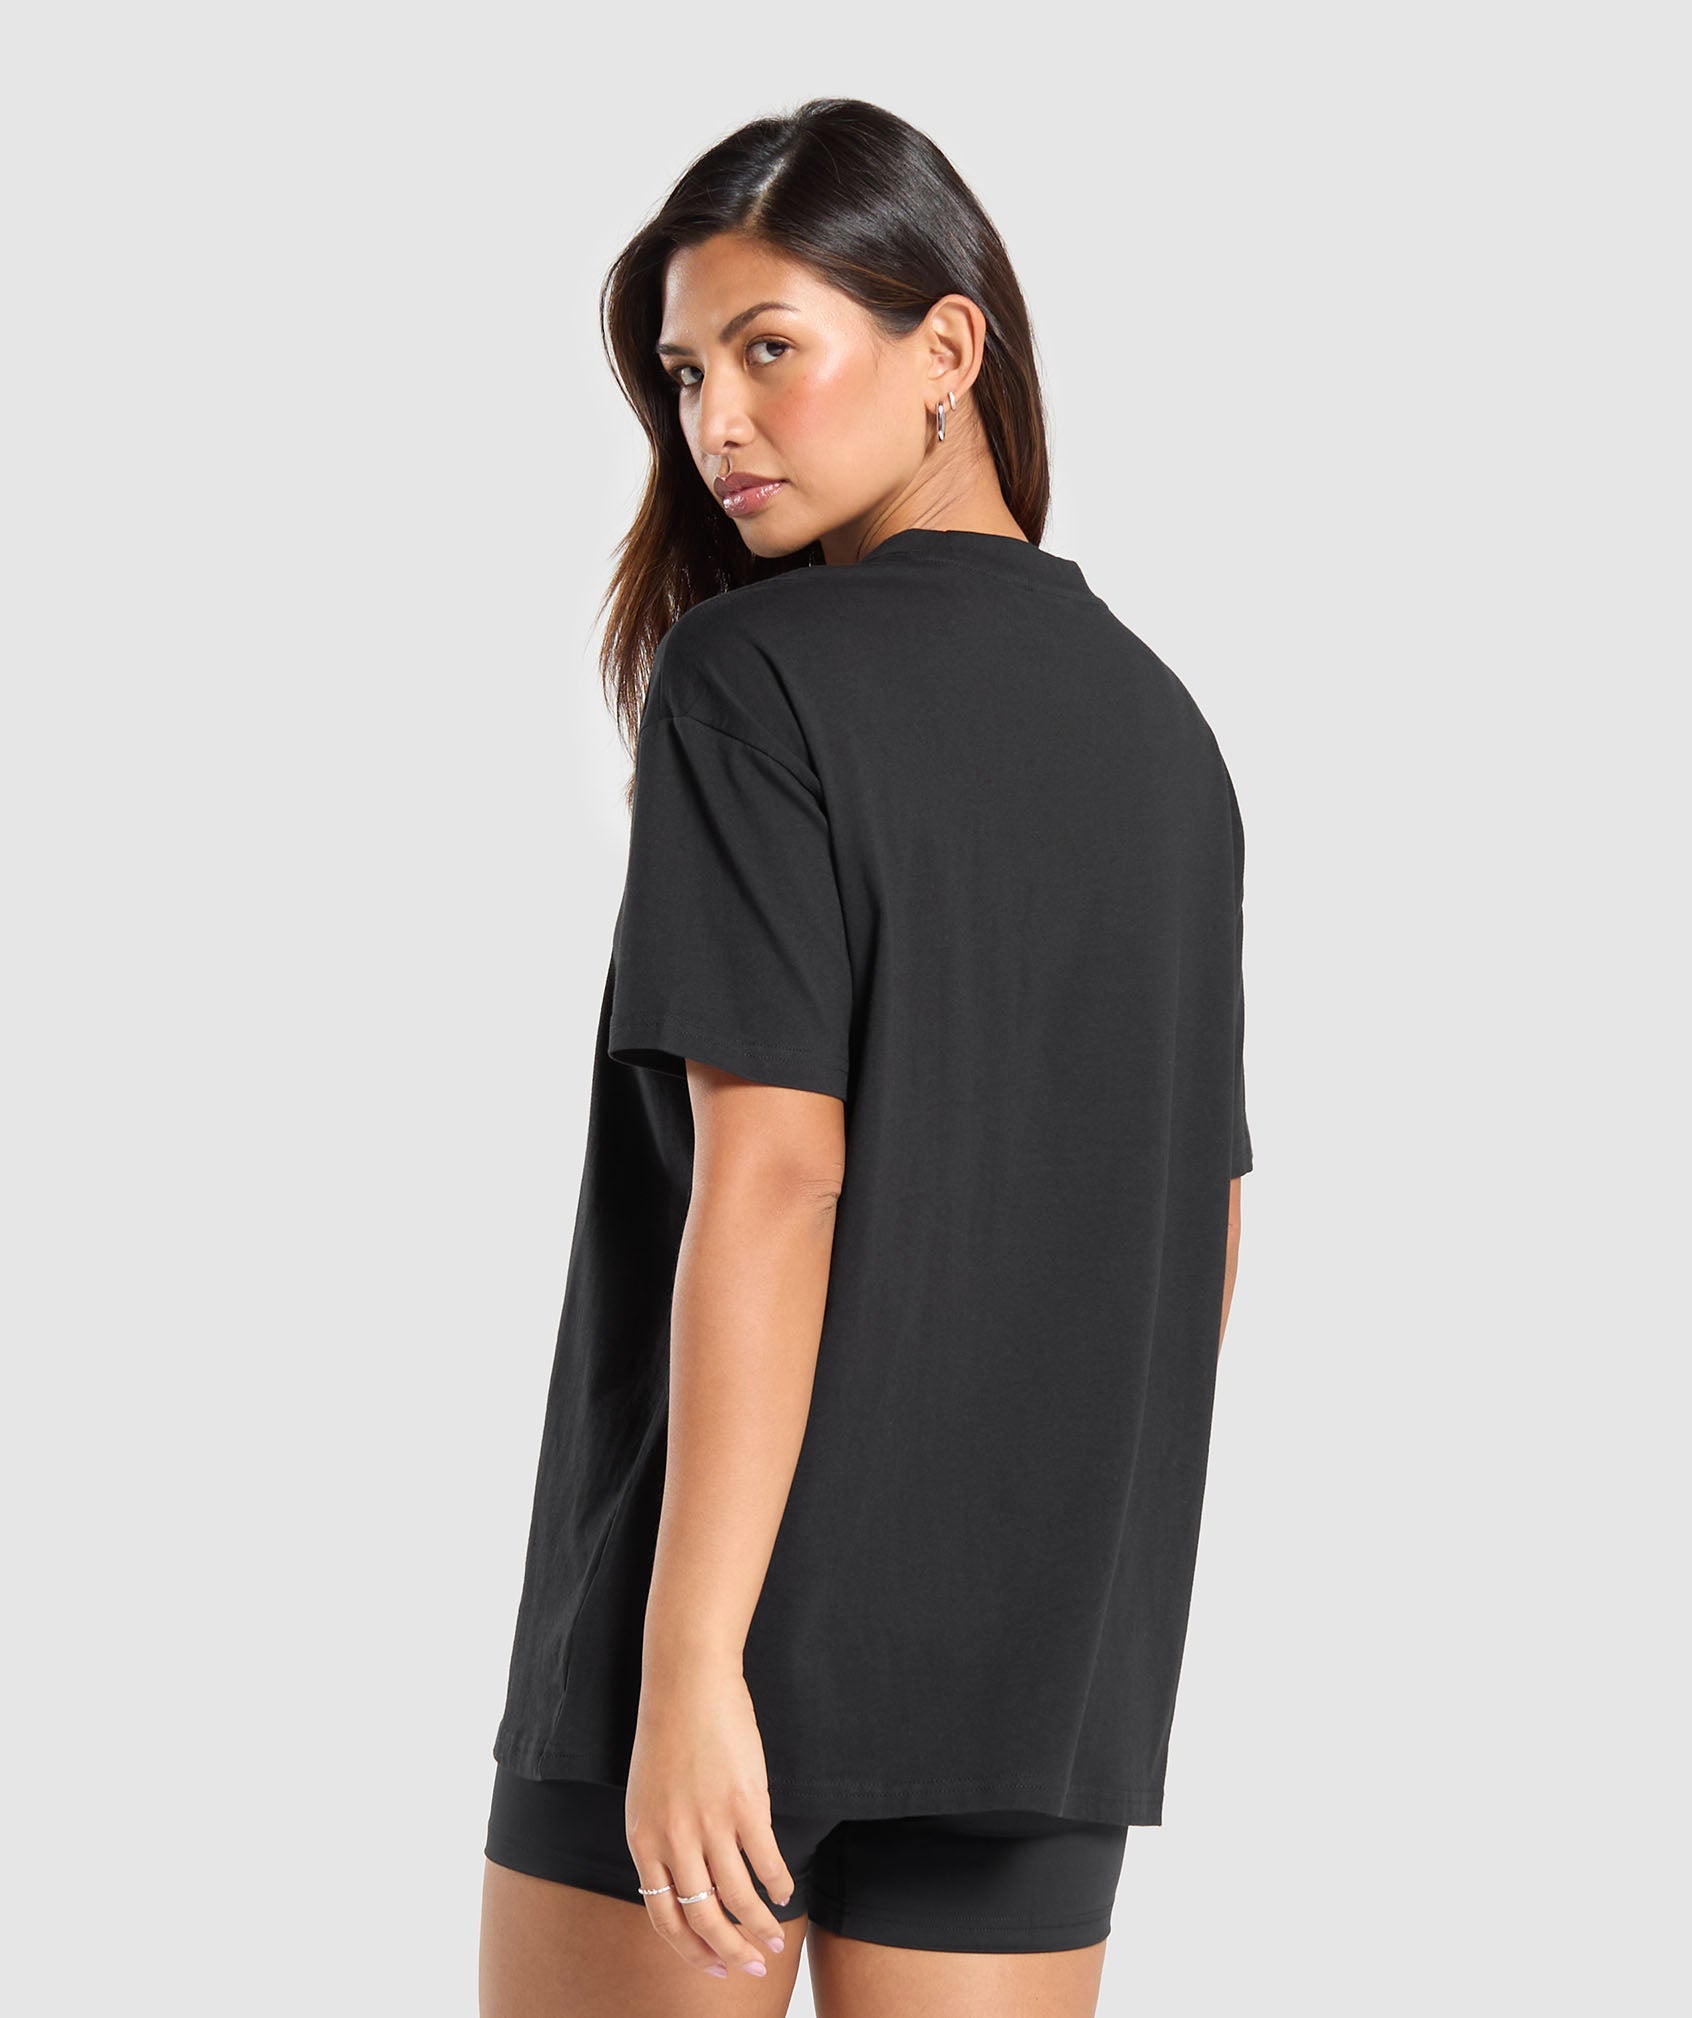 Training Oversized T-Shirt in Black - view 2